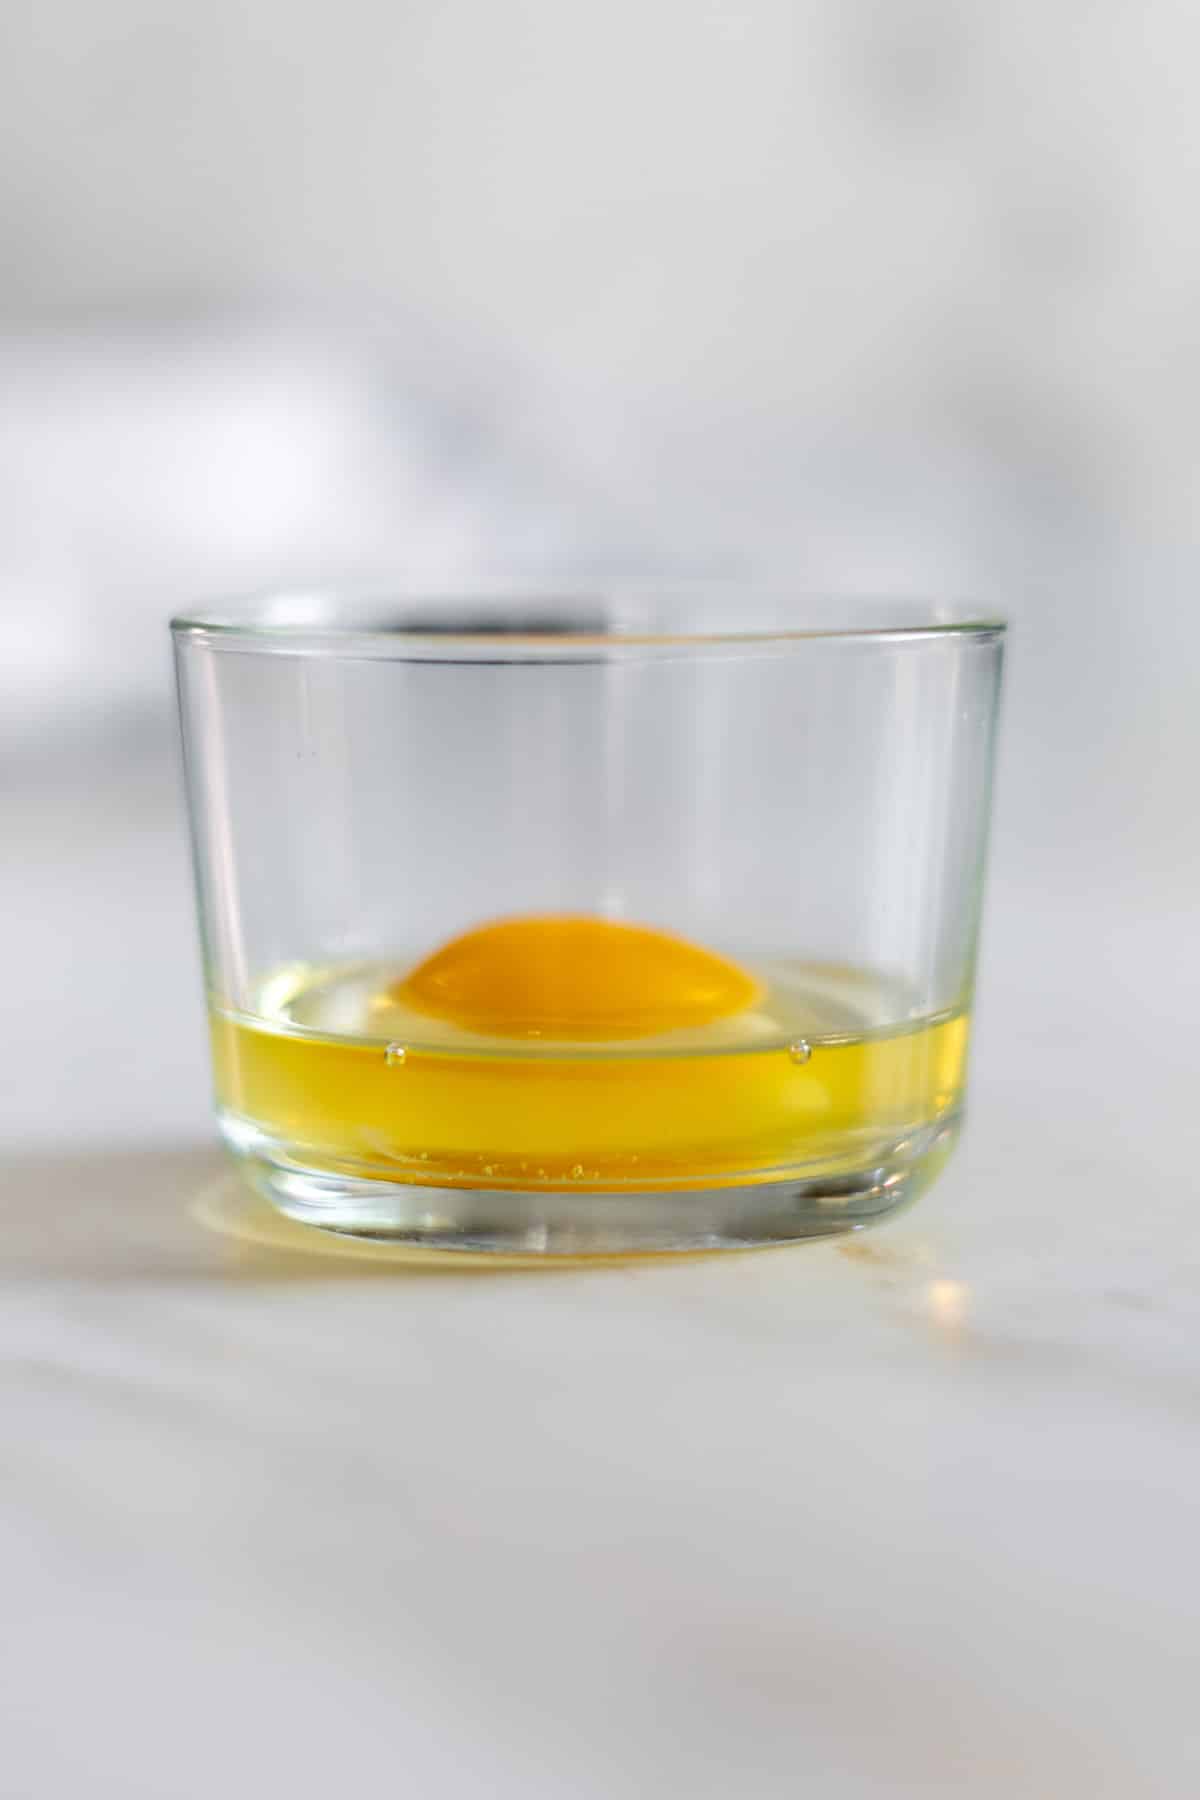 Raw egg in a glass bowl.